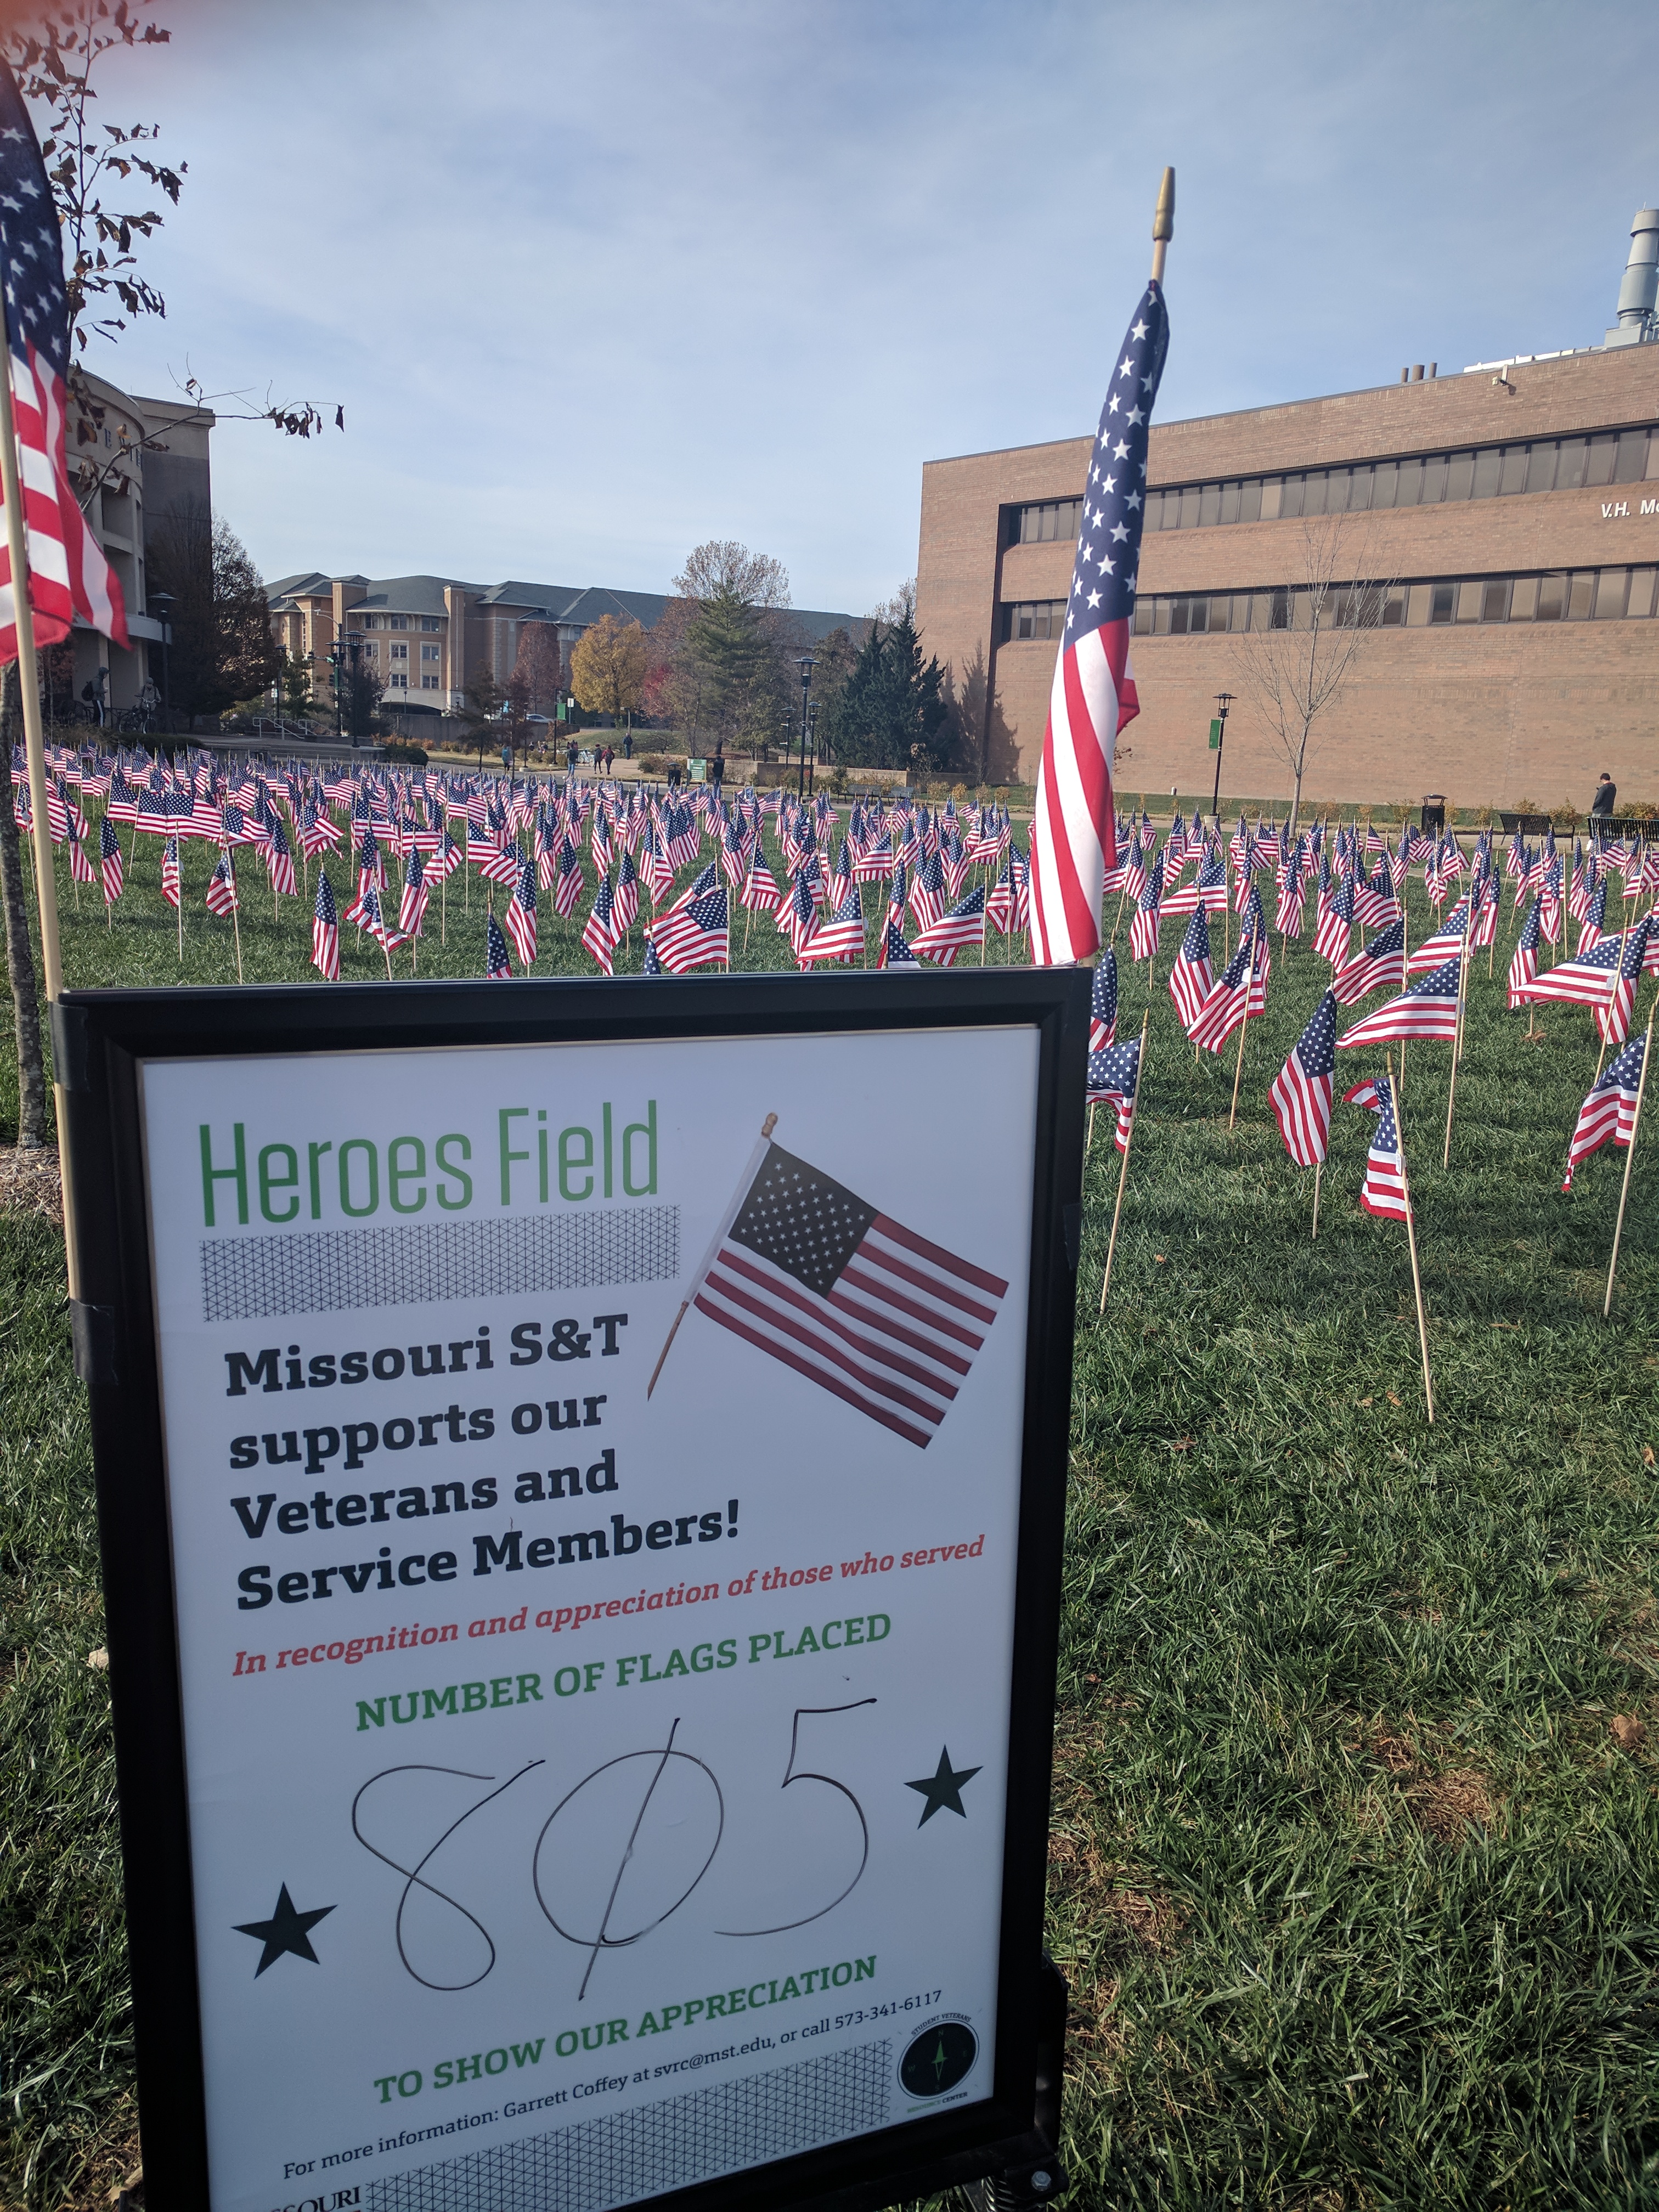 display of how many flags were placed at the field. 